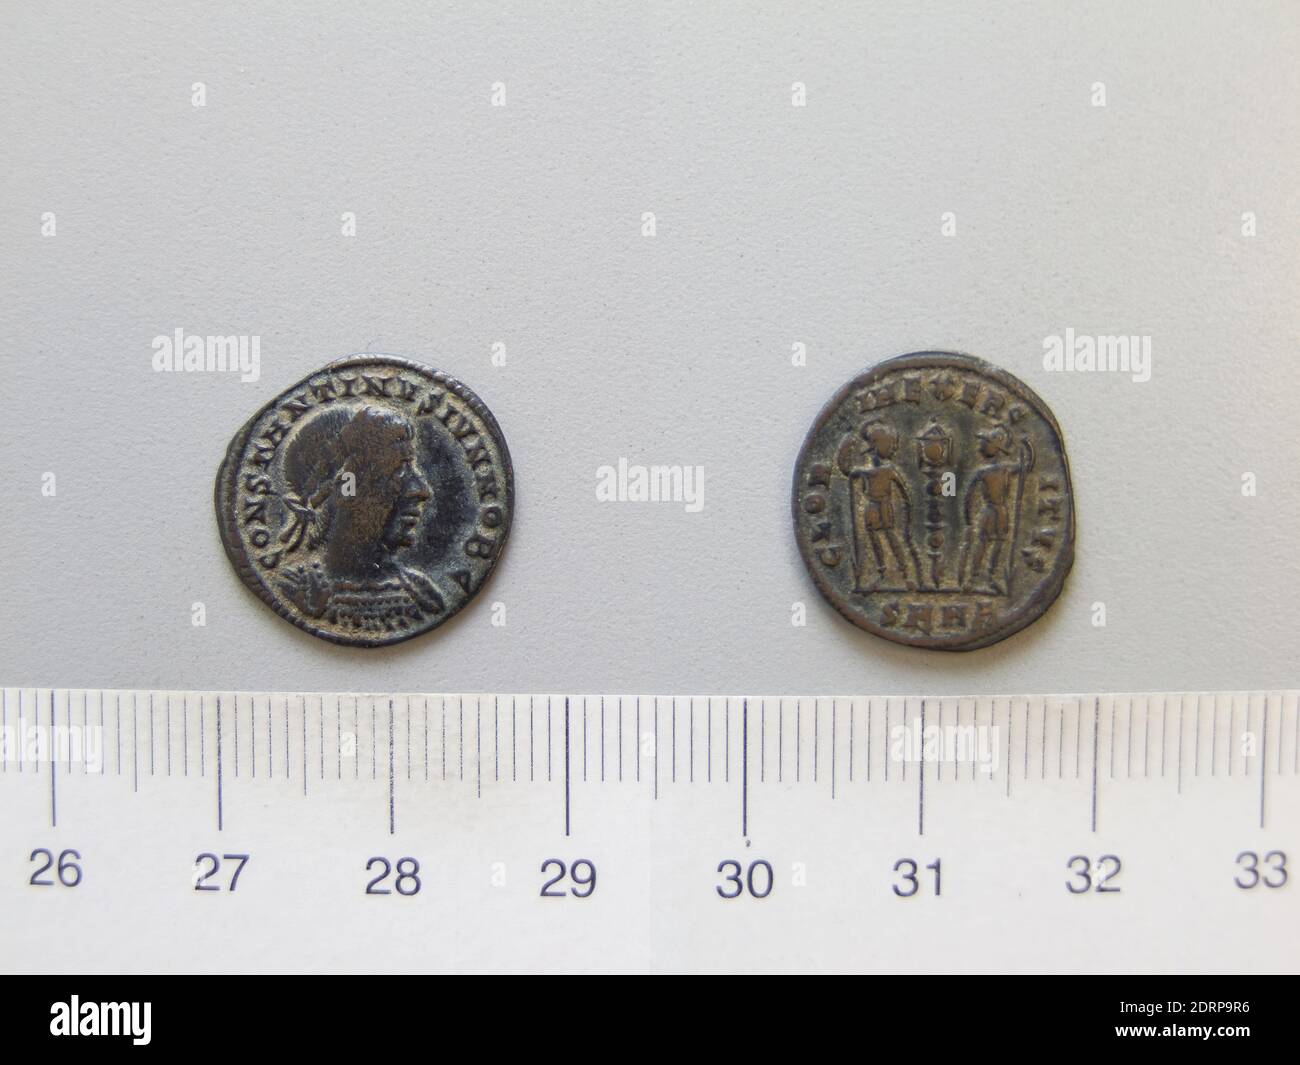 Ruler: Constantine I, Emperor of Rome, A.D. 285–337, ruled A.D. 306–337, Mint: Heraclea, Honorand: Constantine II, Emperor of Rome, A.D. 316–340, 1 Nummus of Constantine I, Emperor of Rome from Heraclea, 335–37, Argentiferous bronze, 1.49 g, 11:00, 17.1 mm, Made in Heraclea, Lucania, Roman, 4th century, Numismatics Stock Photo